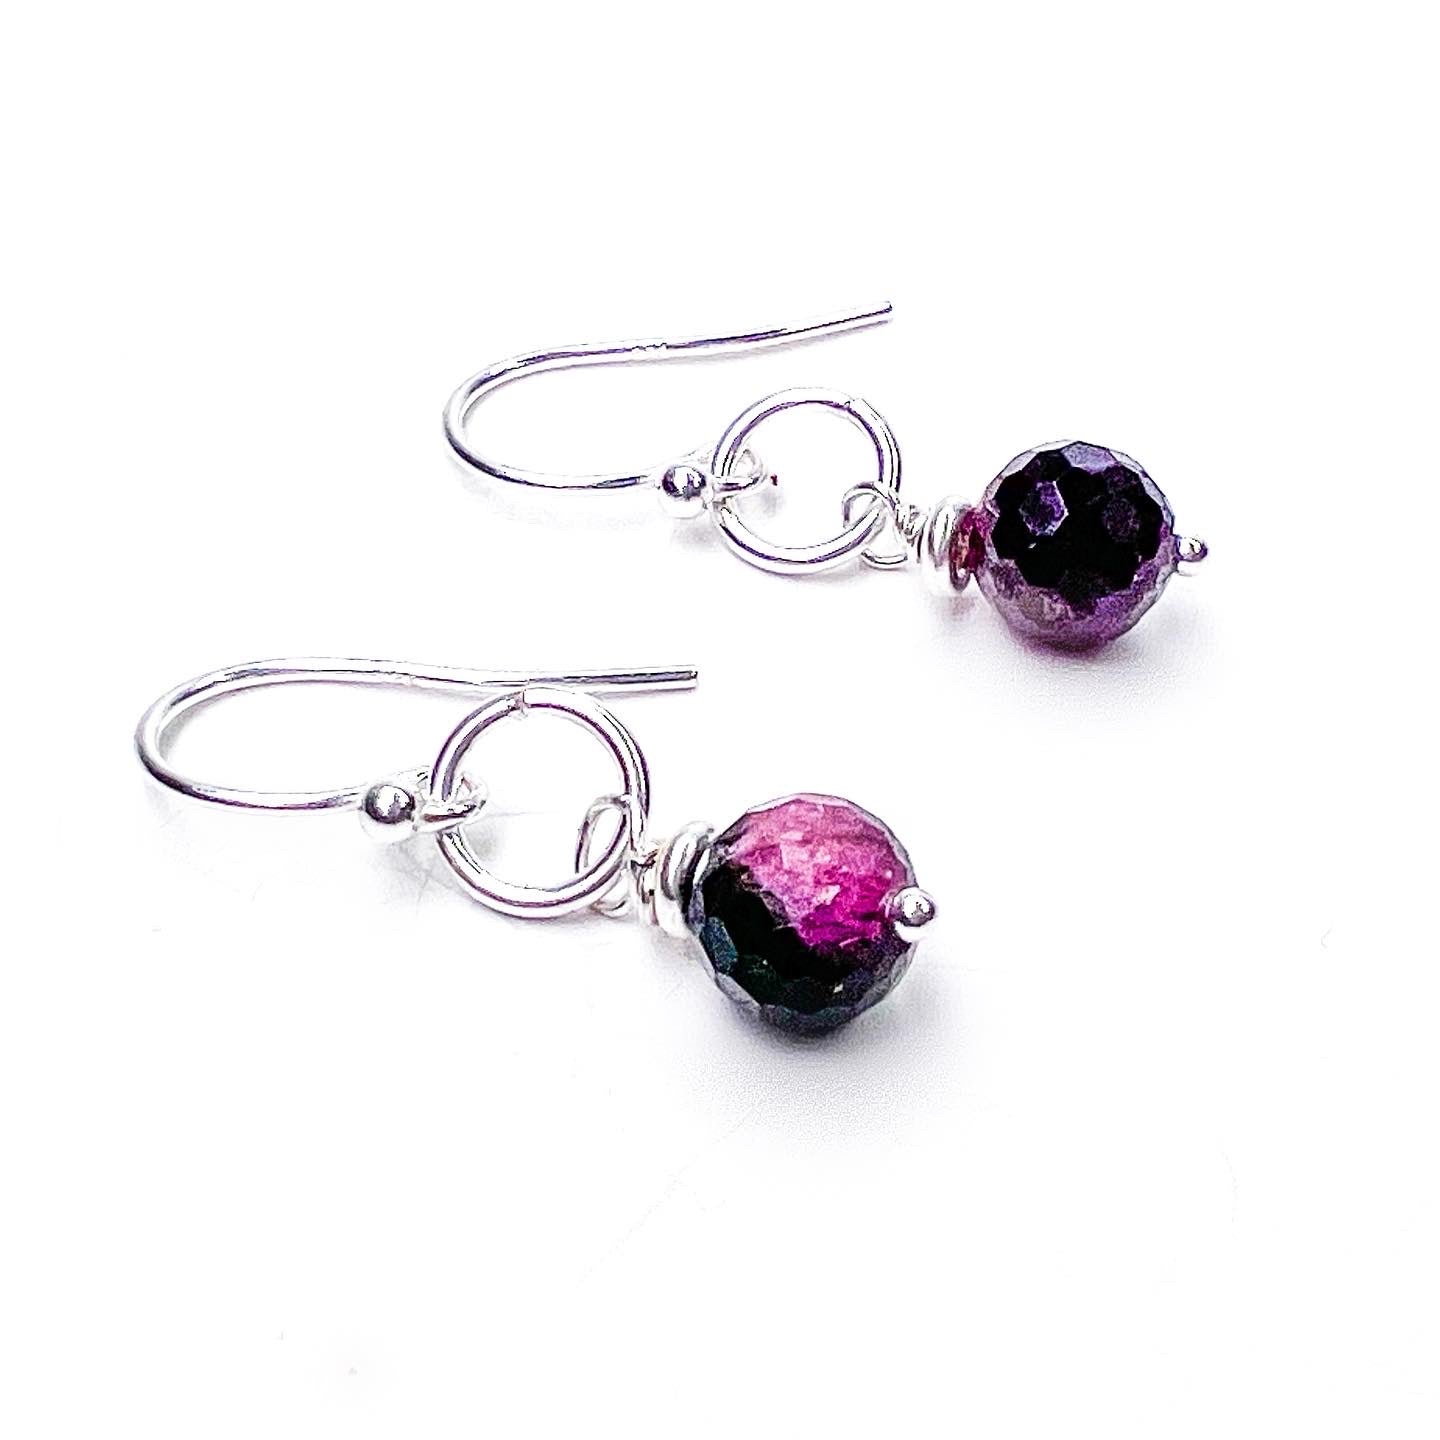 Faceted Tourmaline earrings in sterling silver